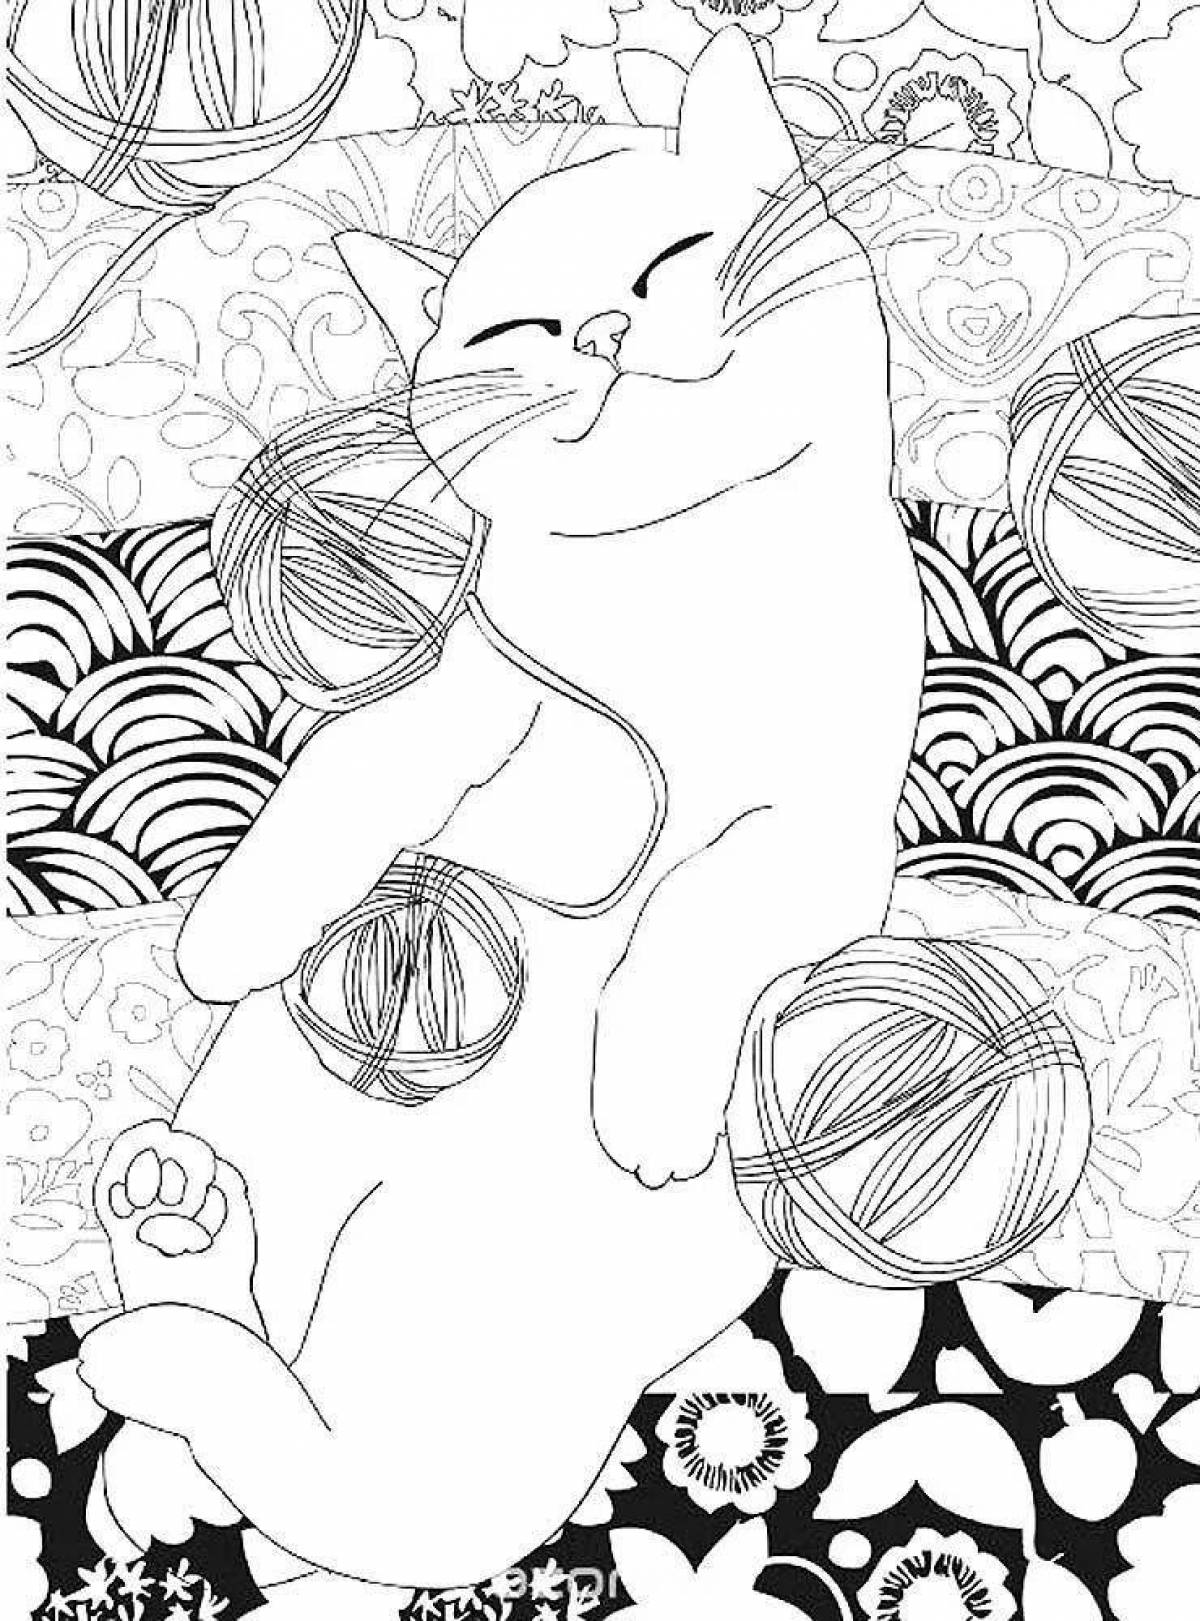 Dazzling cat therapy anti-stress coloring book